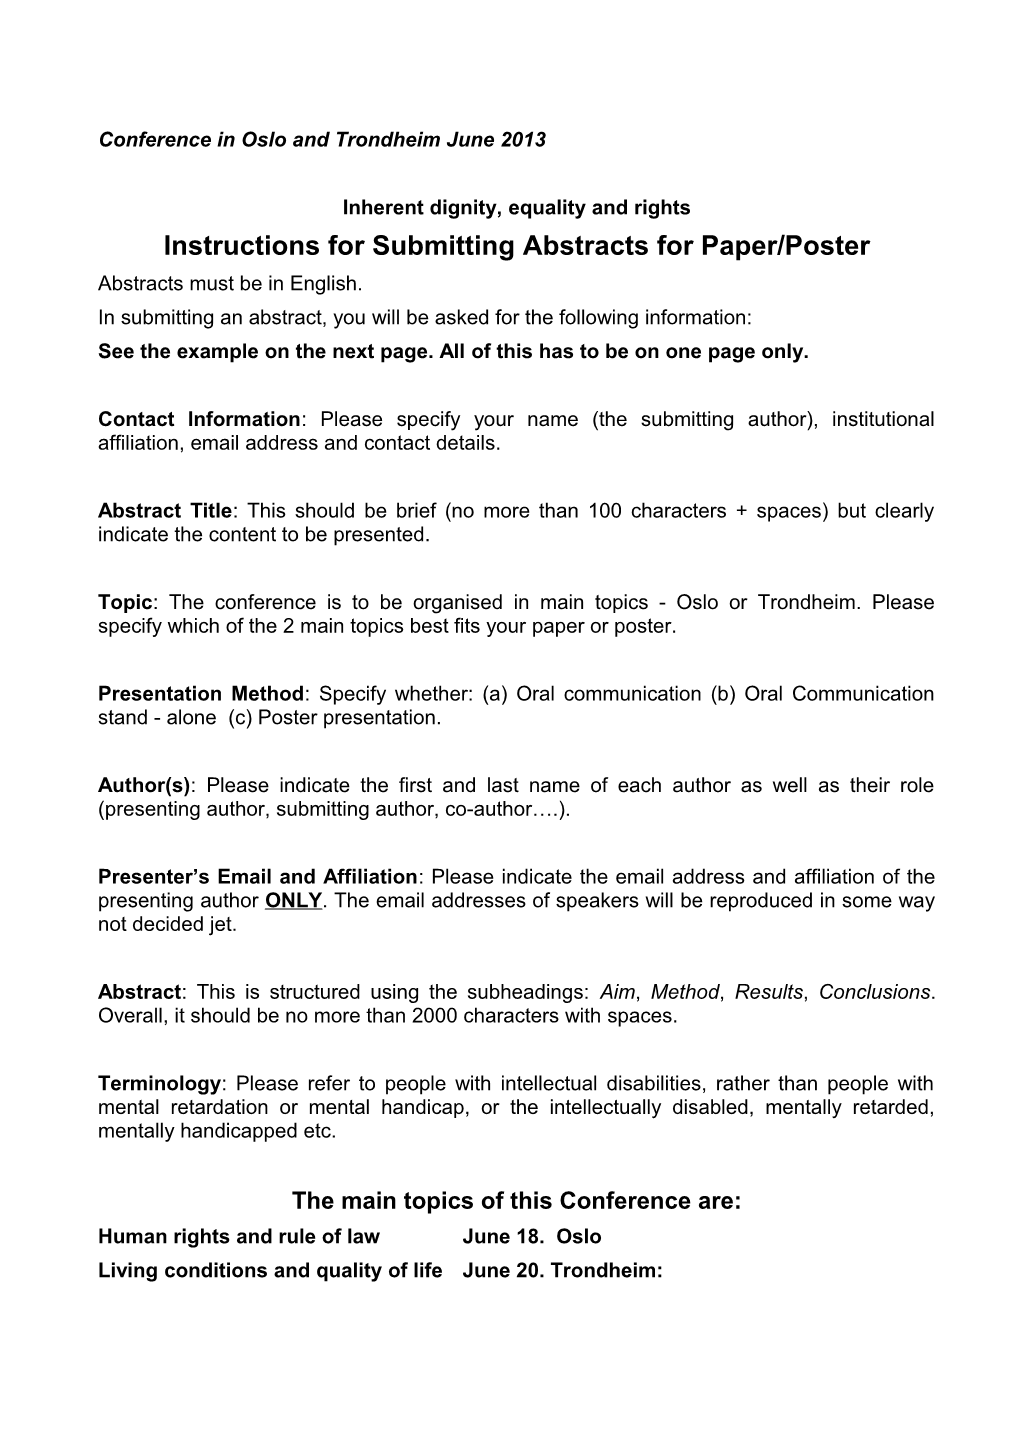 Instructions for Submitting Abstracts for Paper/Poster